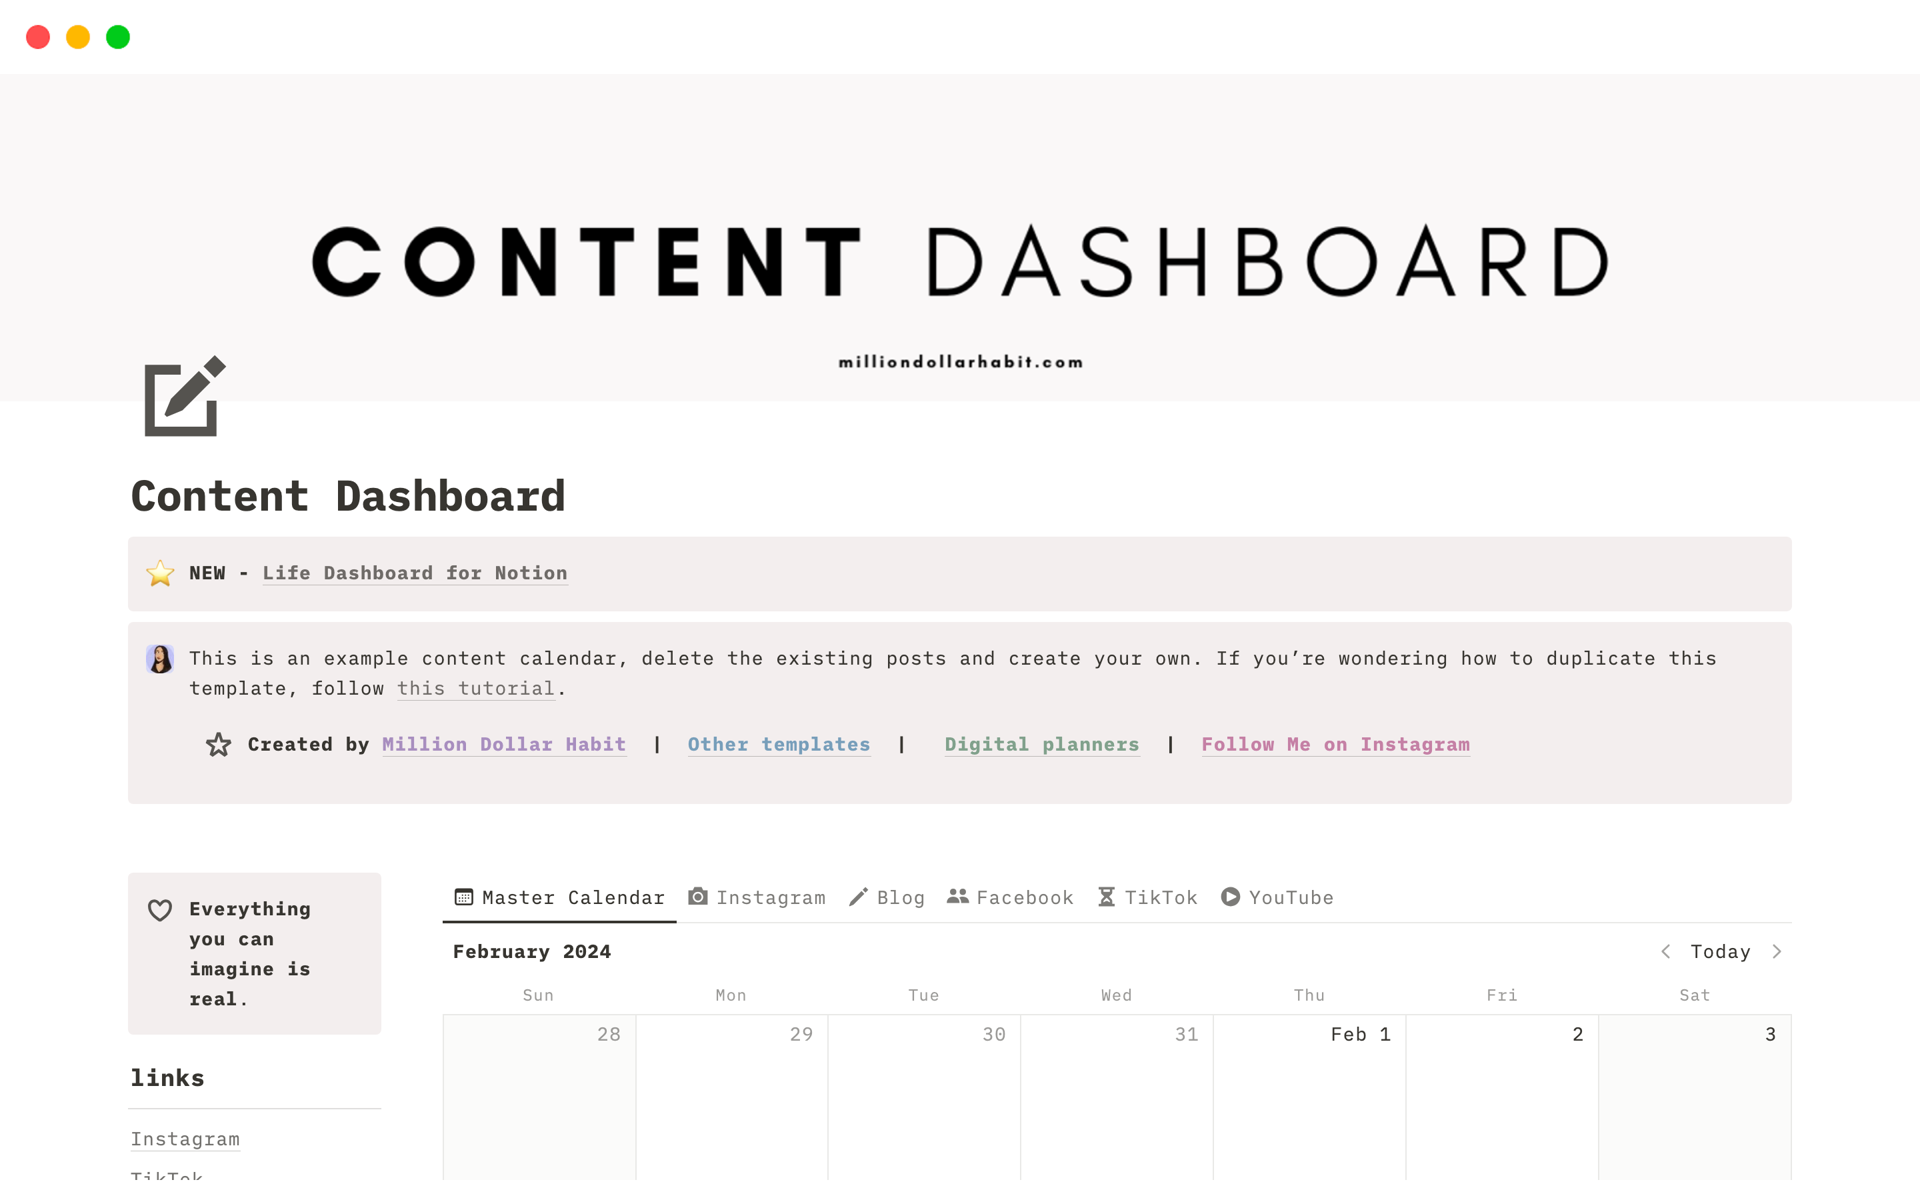 This template features a content dashboard and it's designed to help digital creators like you stay organized and productive while managing your social media content.